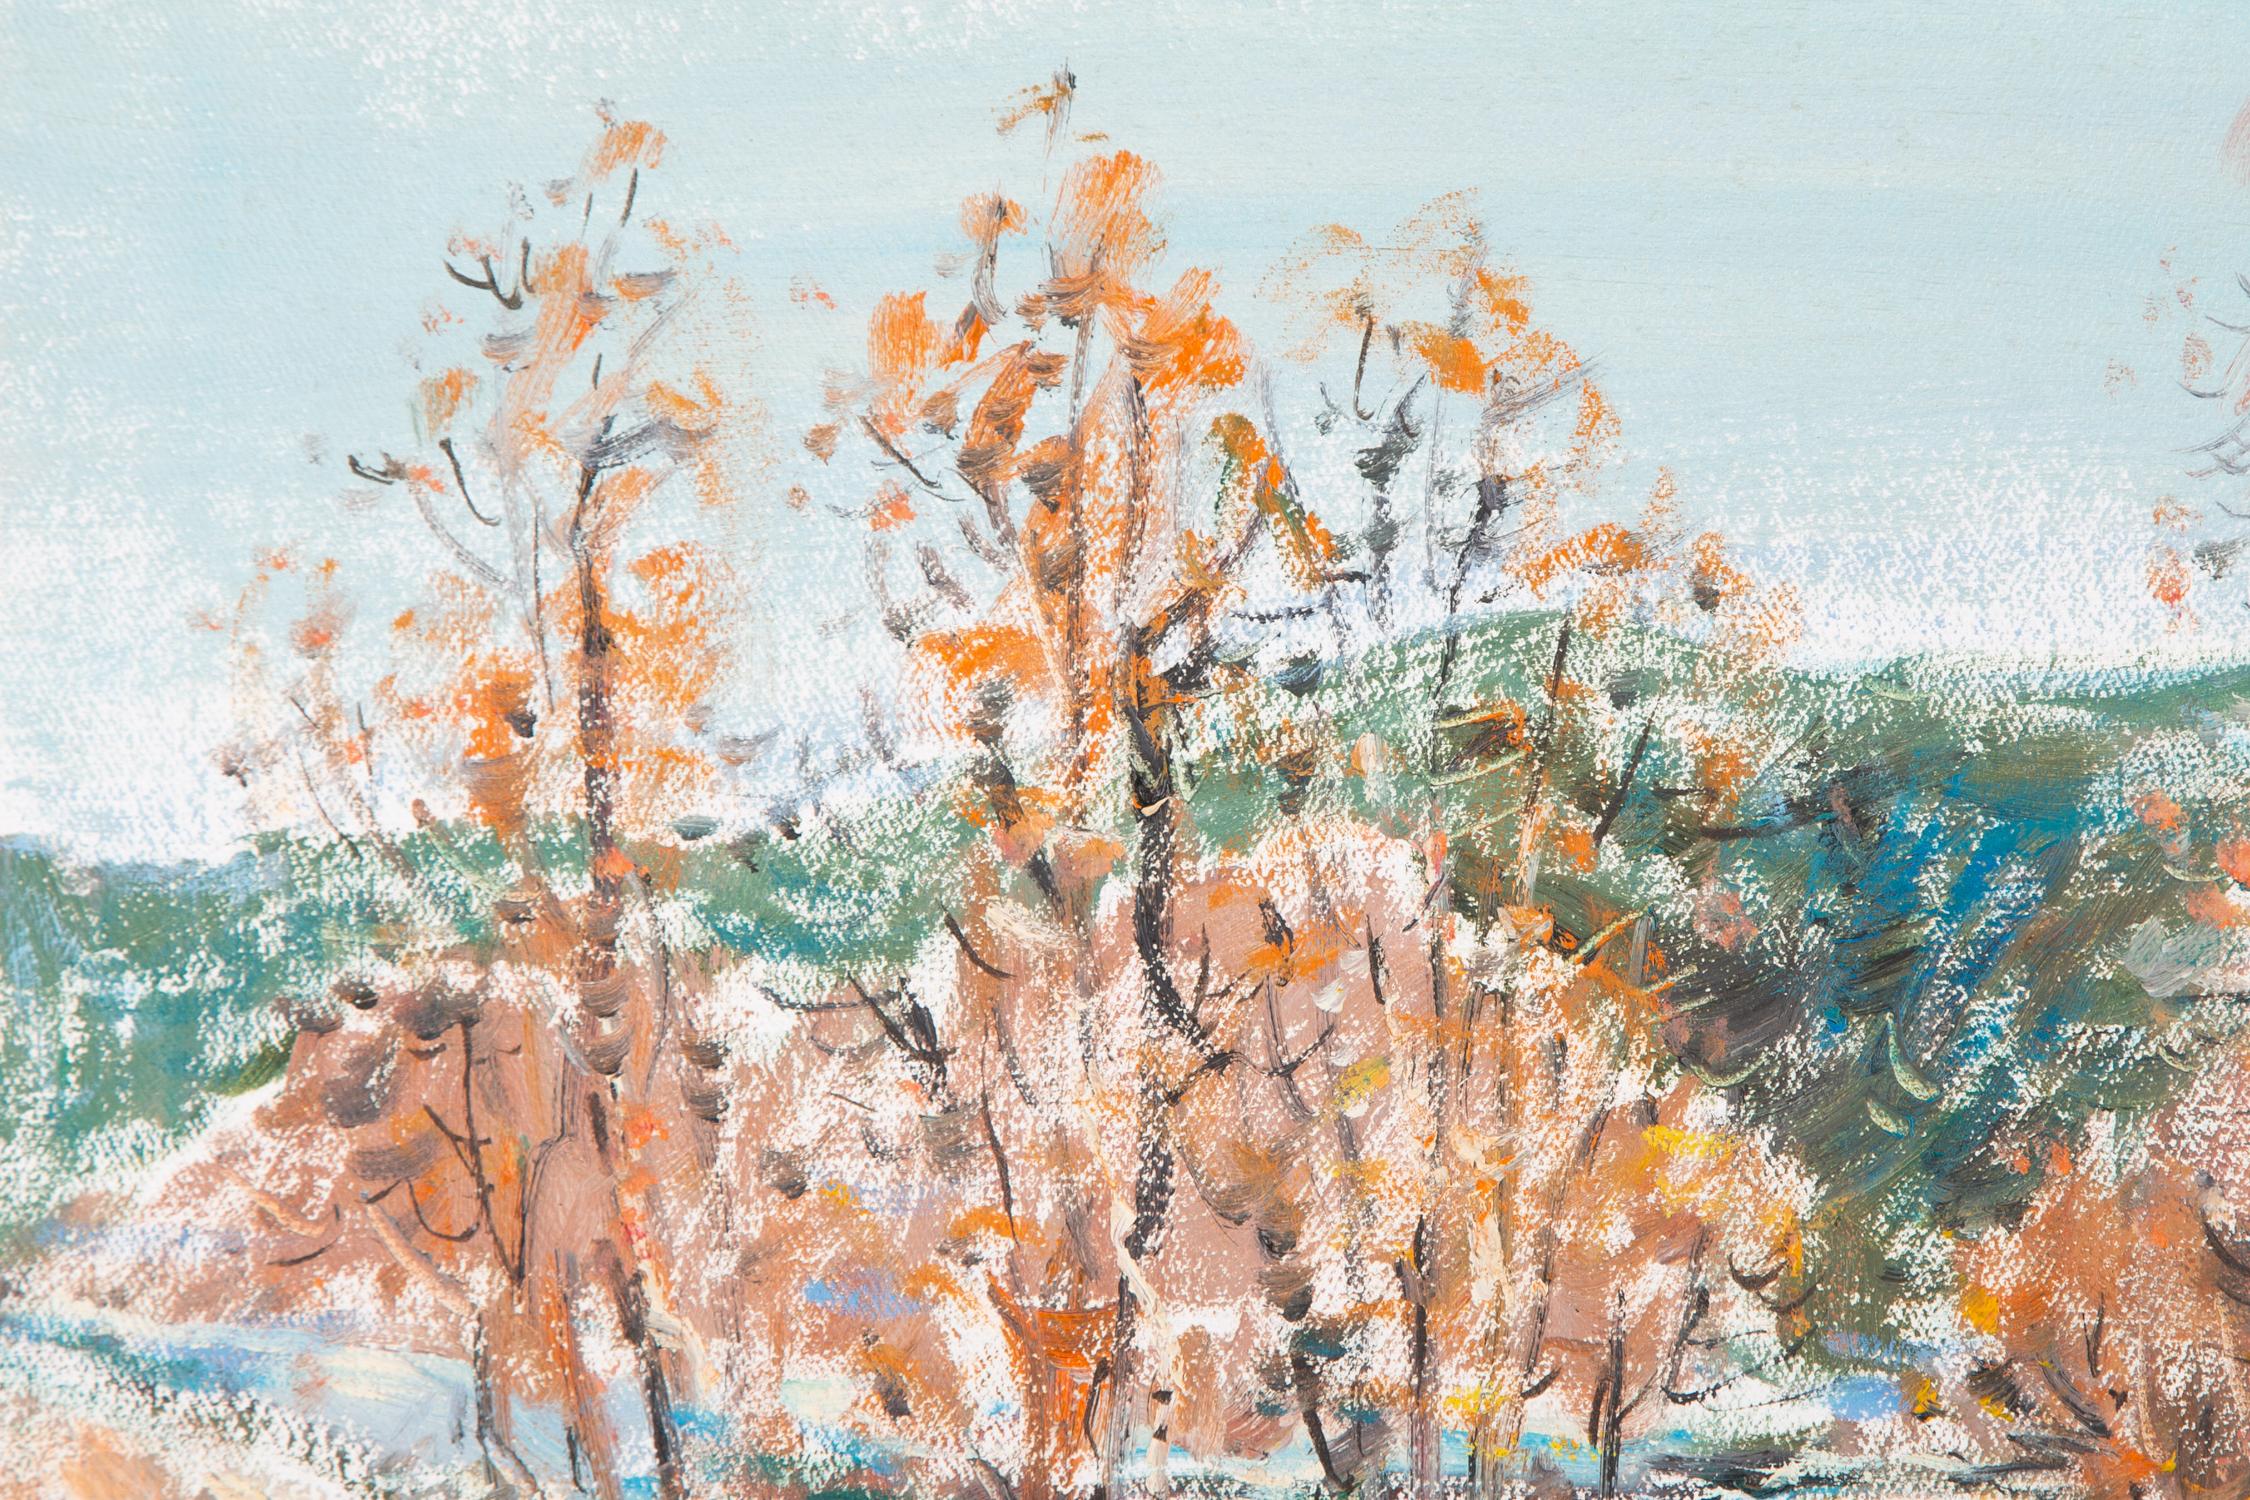 Birch Trees on the Roadside in Winter - Painting by Haibao Chen